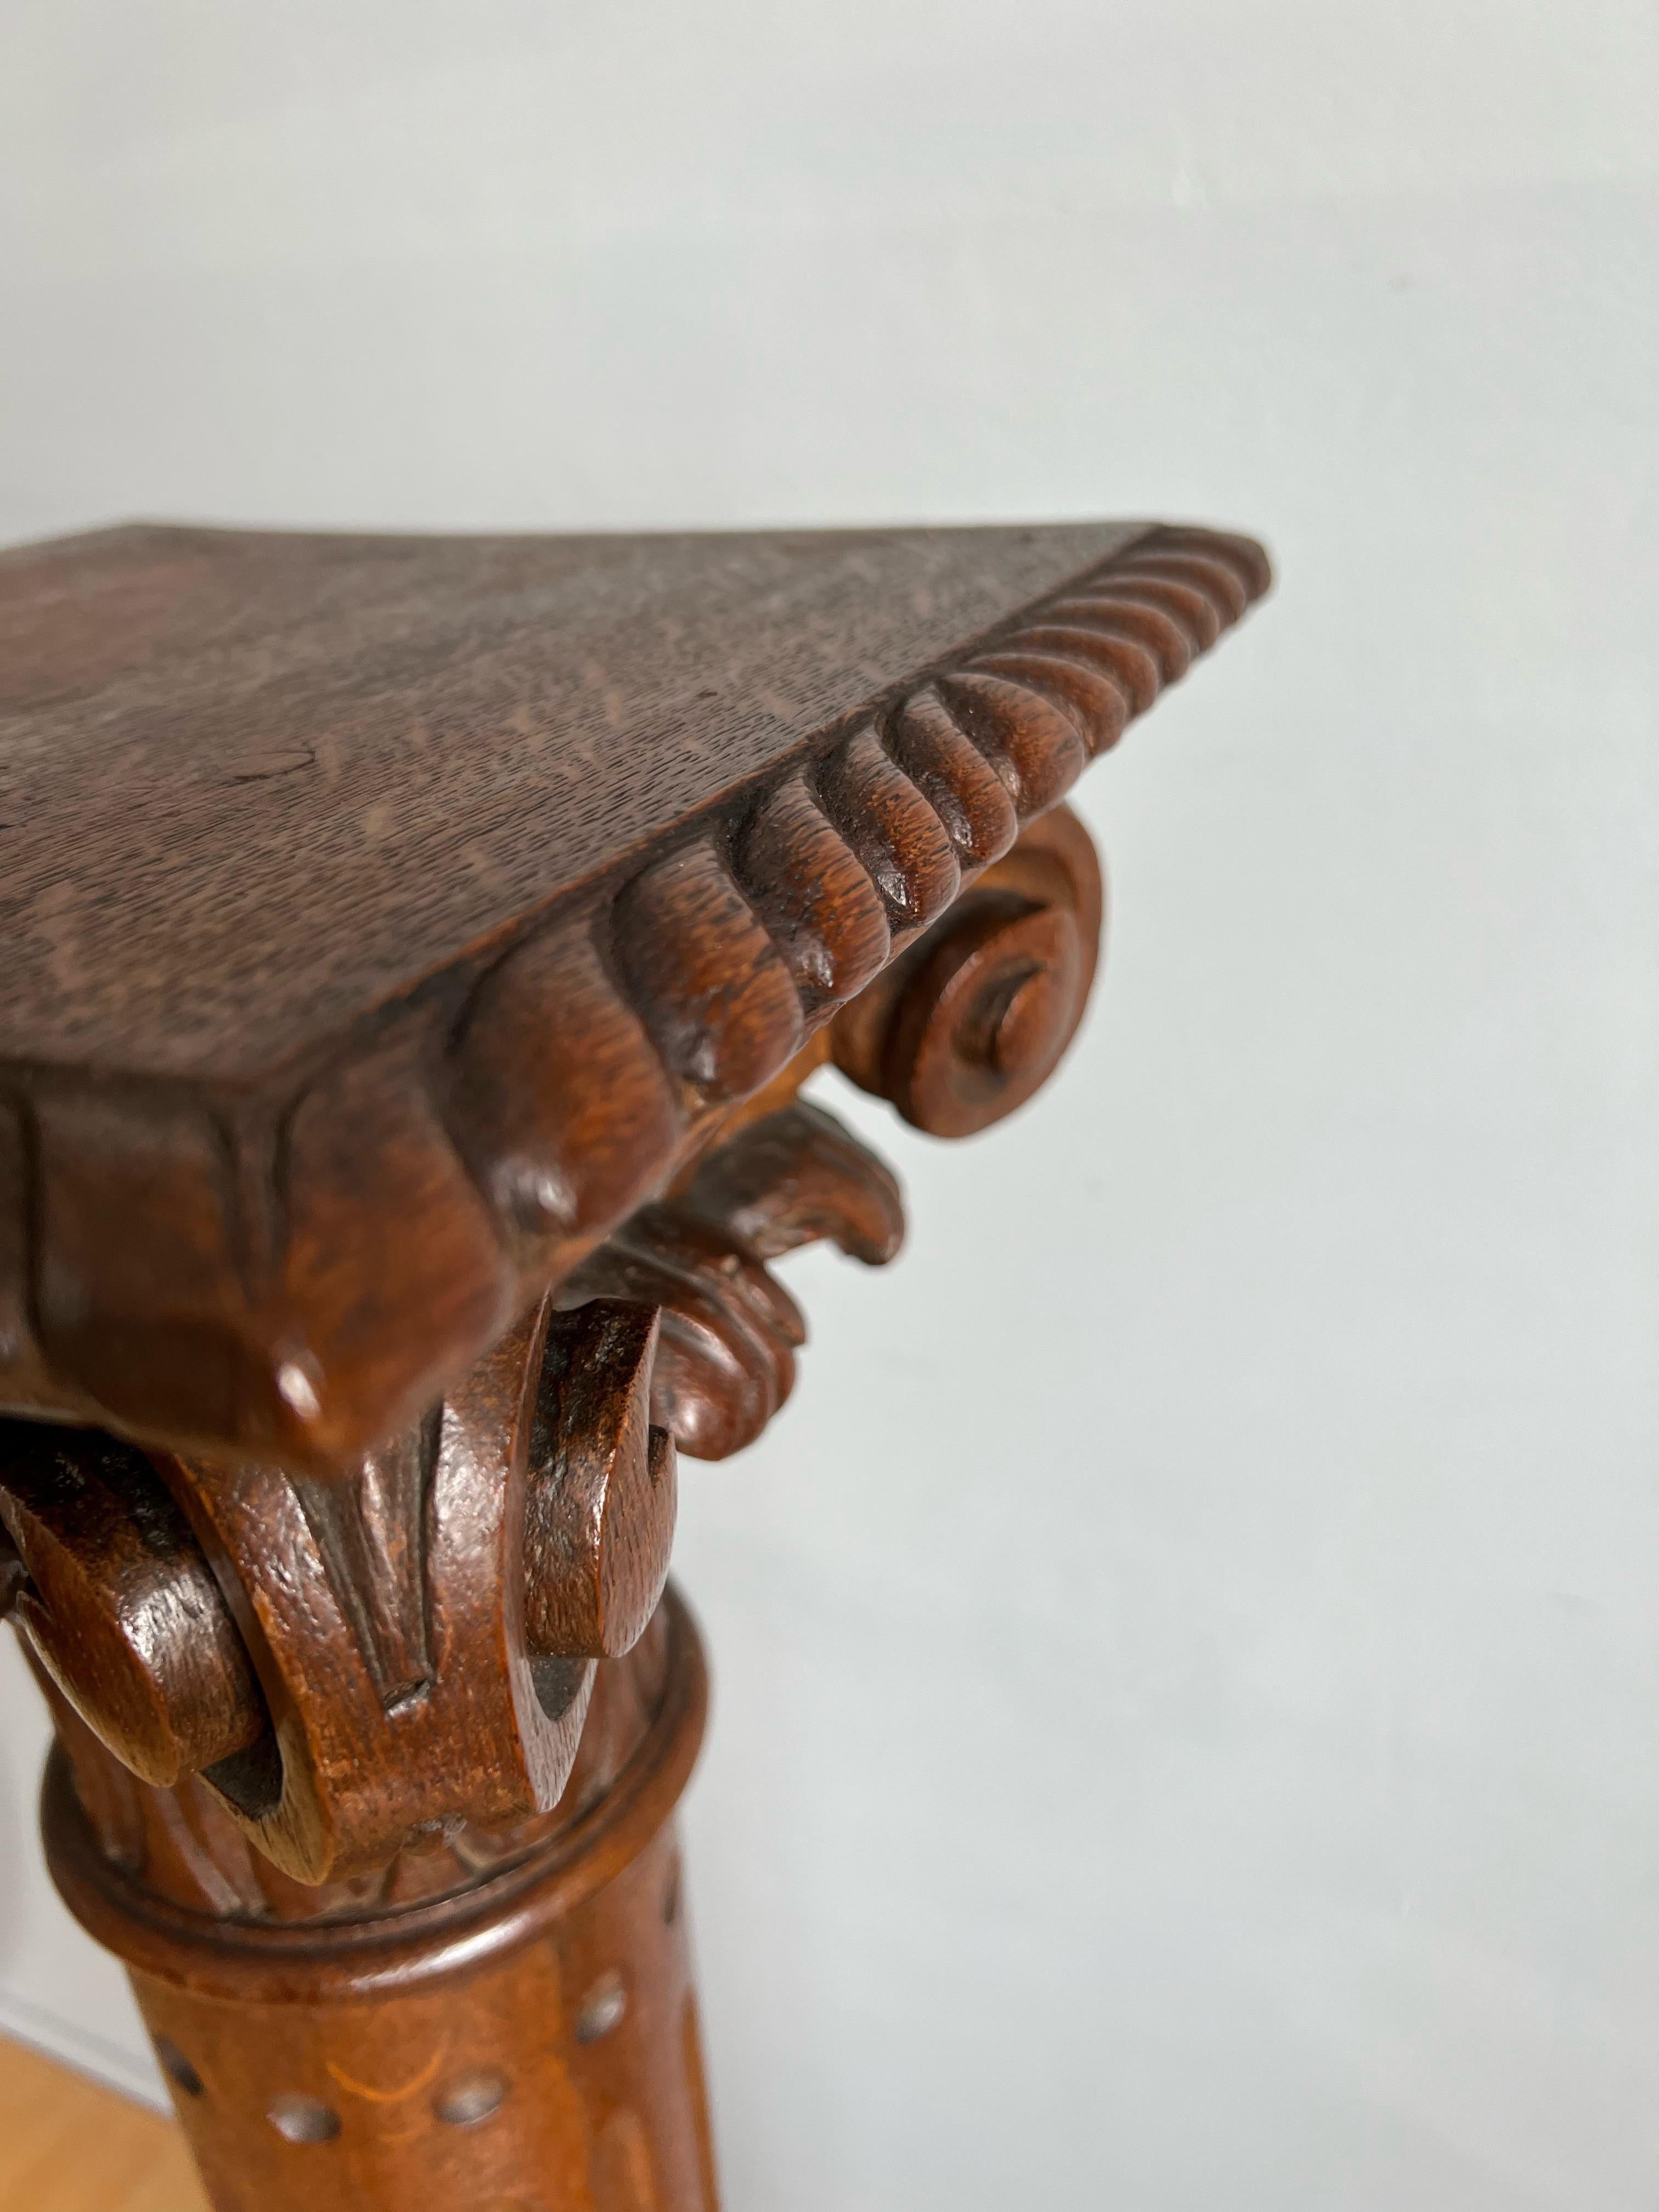 Antique Early 1900s Majestic Hand Carved Oak Display Sculpture Stand / Pedestal For Sale 2